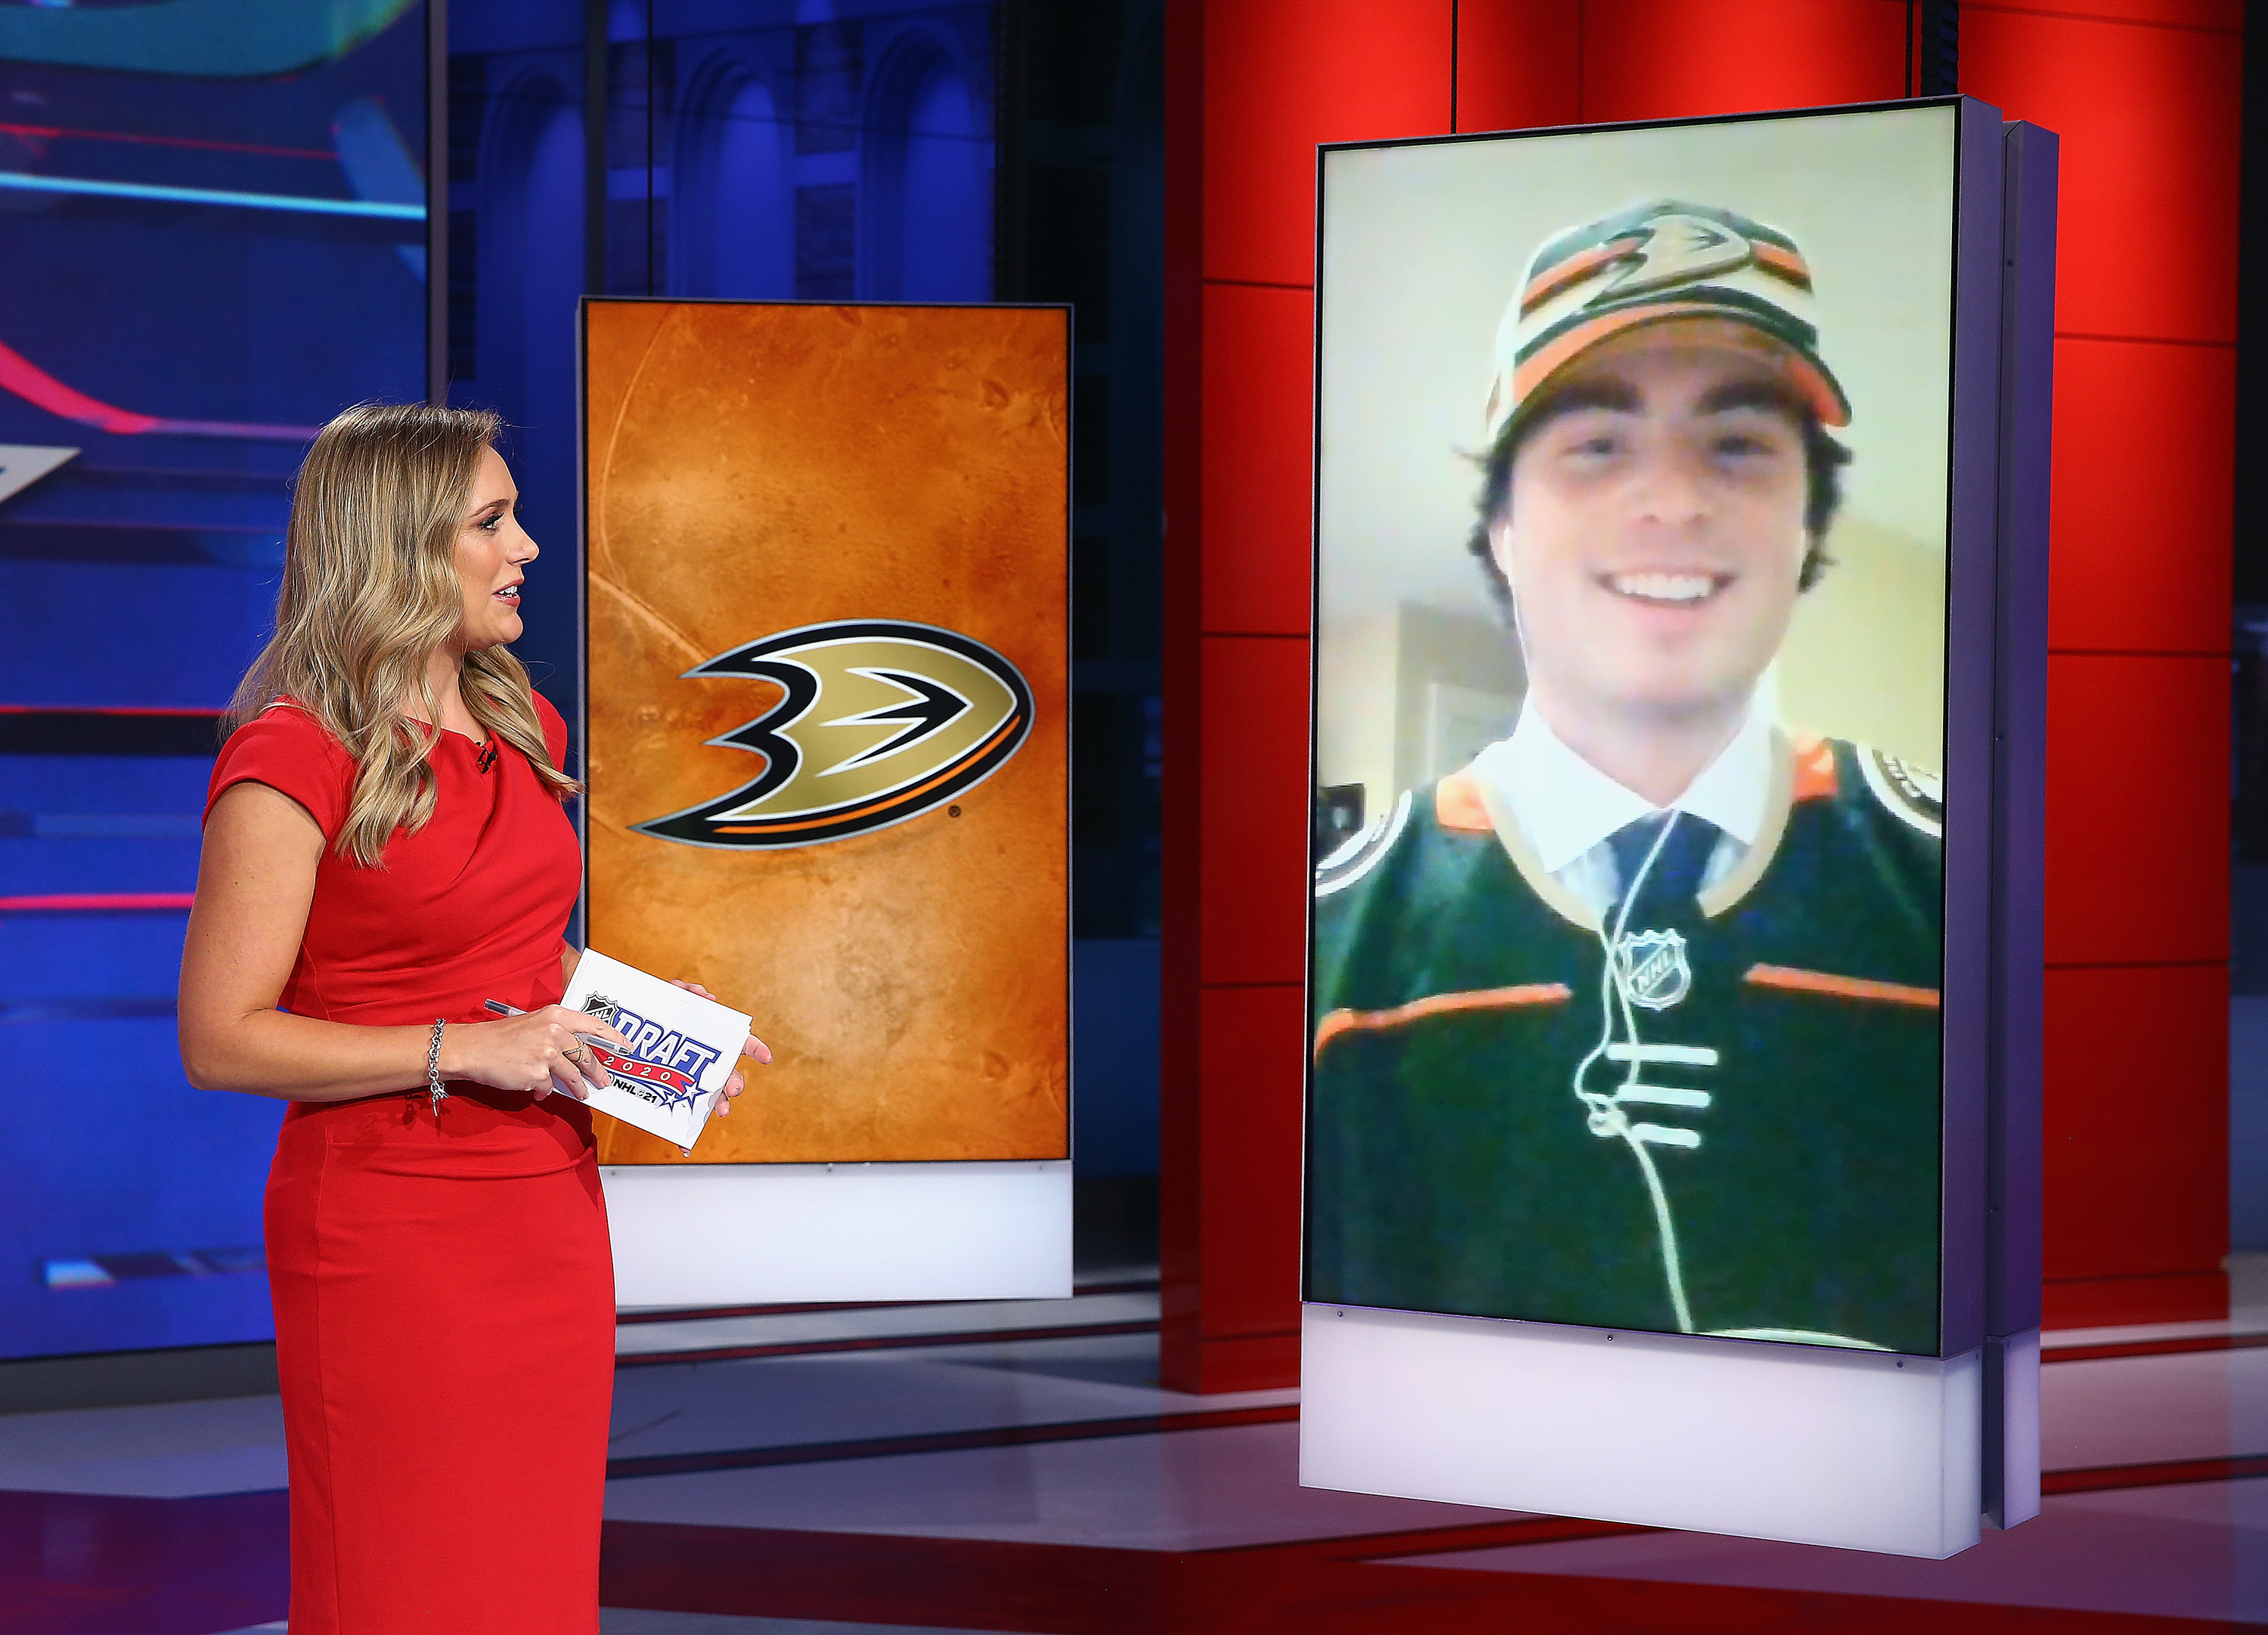 SECAUCUS, NEW JERSEY - OCTOBER 06: Jamie Hersch of the NHL Network interviews Jamie Drysdale from Erie of the OHL after his selection by the Anaheim Ducks in the 2020 National Hockey League Draft at the NHL Network Studio on October 06, 2020 in Secaucus, New Jersey.